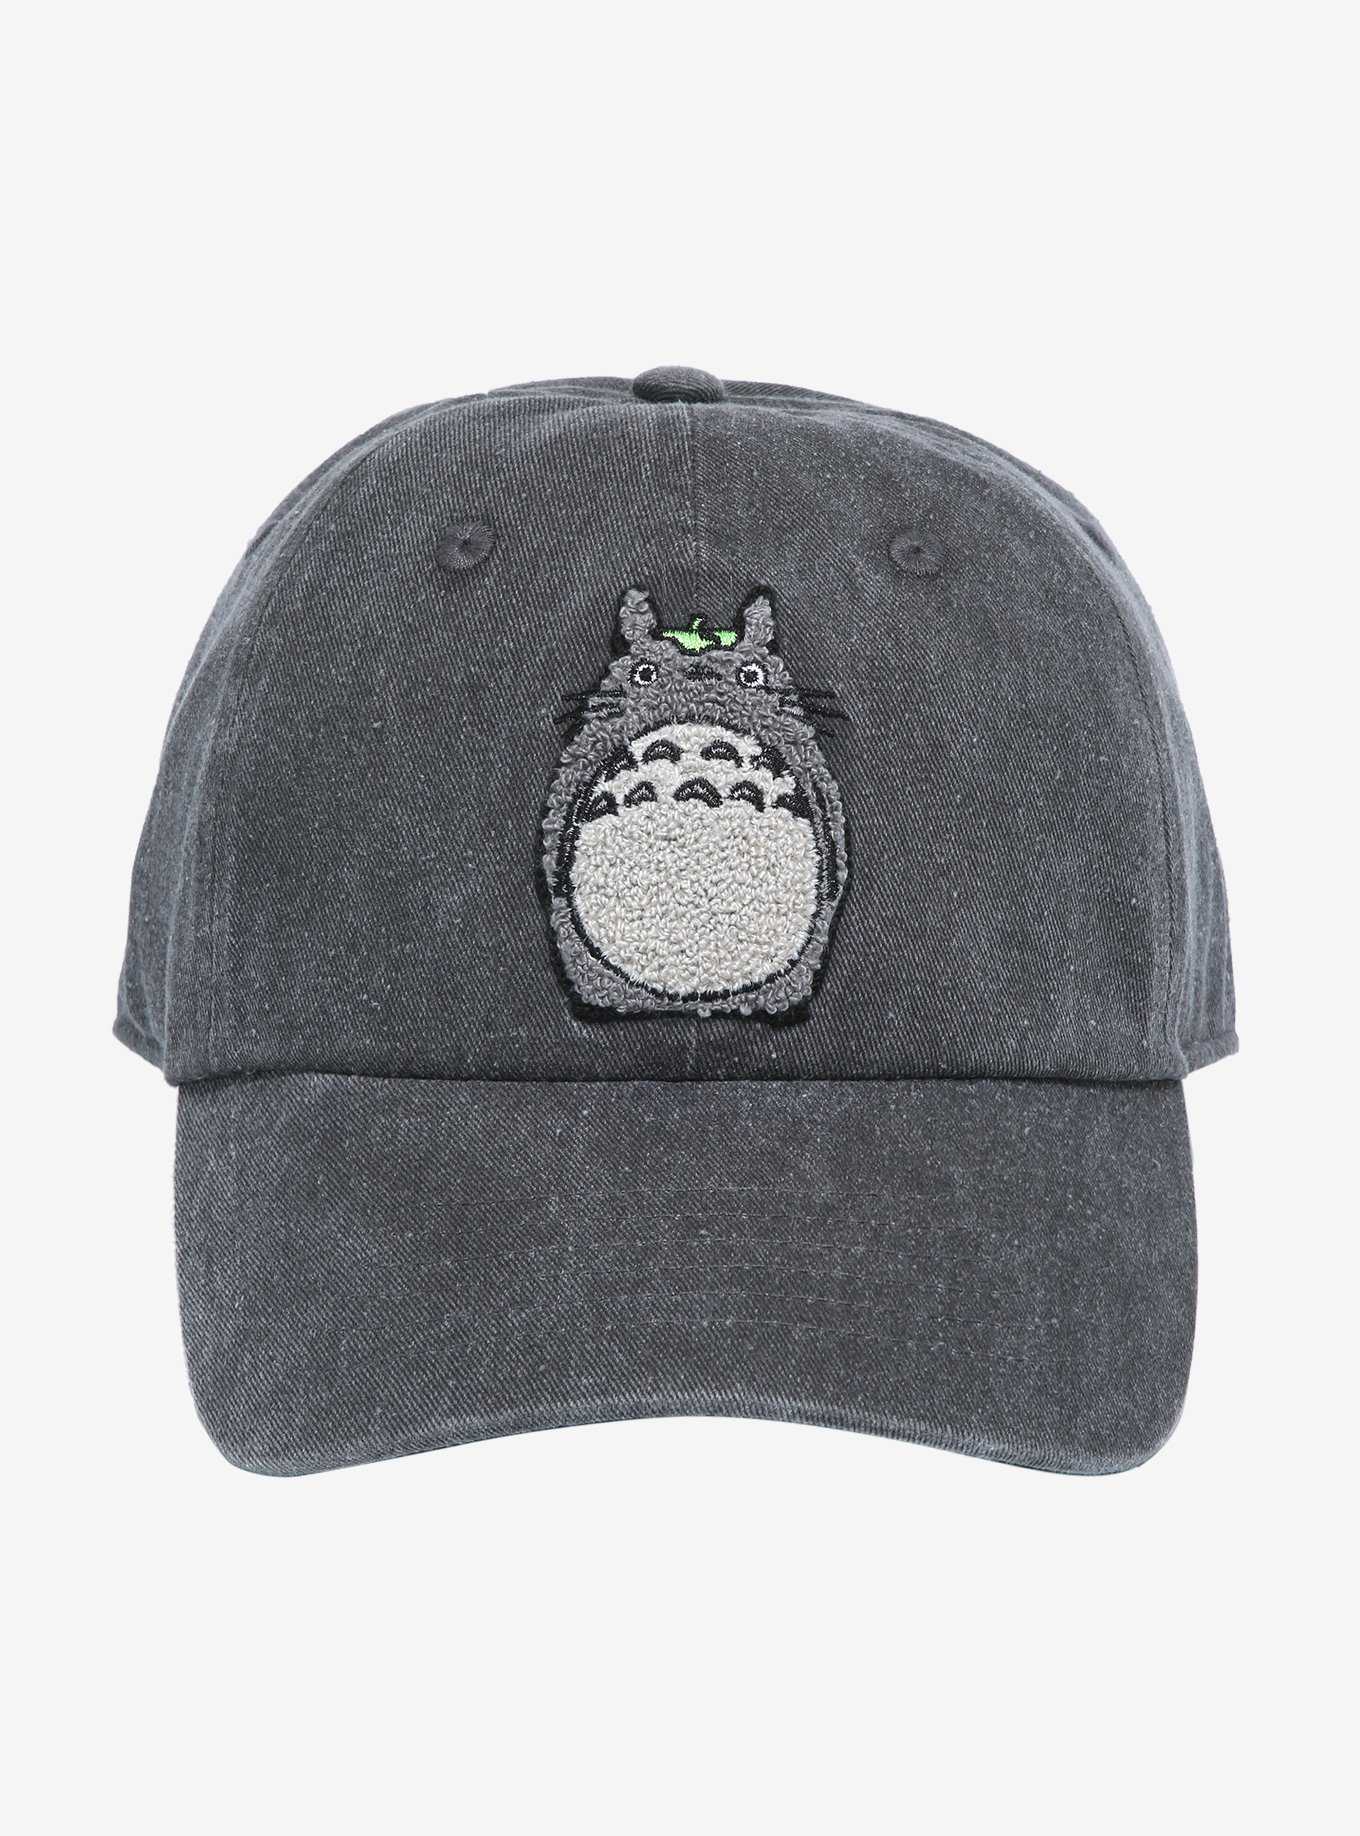 Studio Ghibli My Neighbor Totoro Chenille Patch Cap - BoxLunch Exclusive, , hi-res